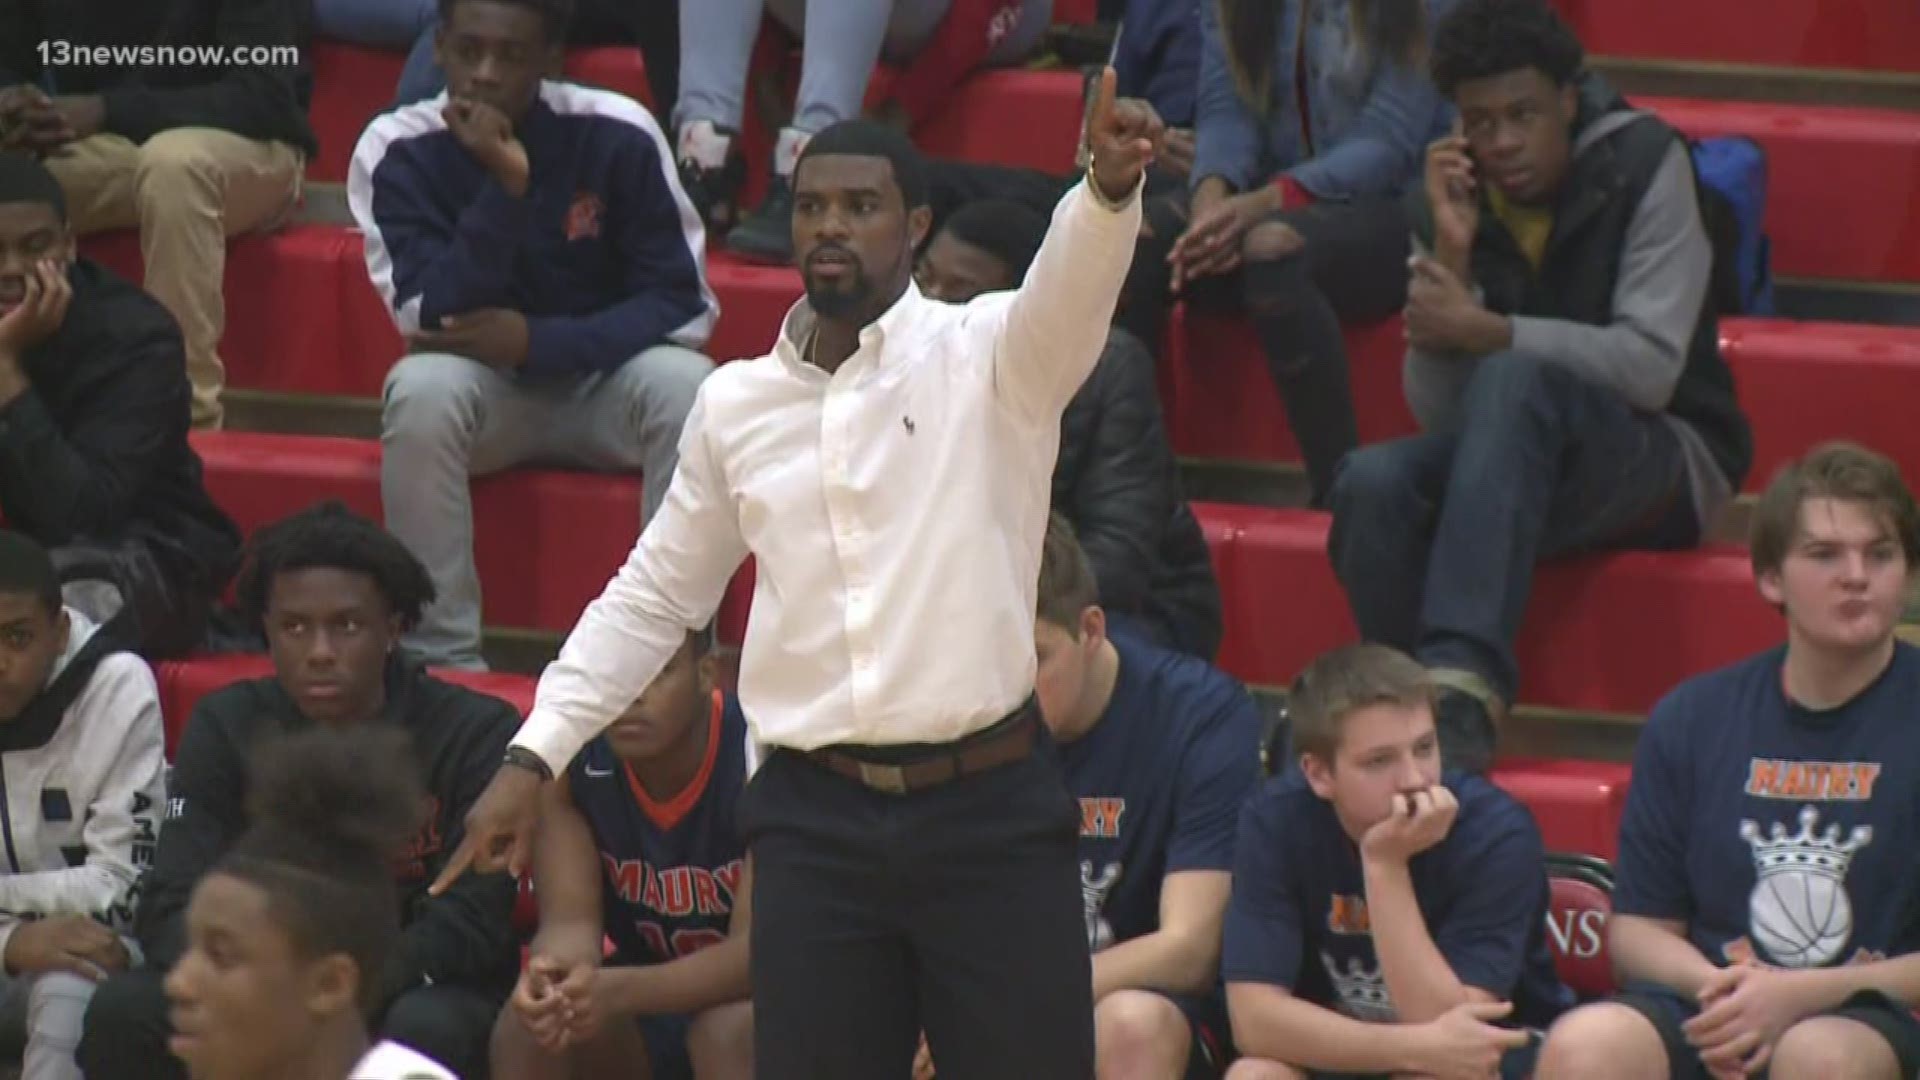 The Virginia High School League named Maury's Plummer the state basketball coach of the year.